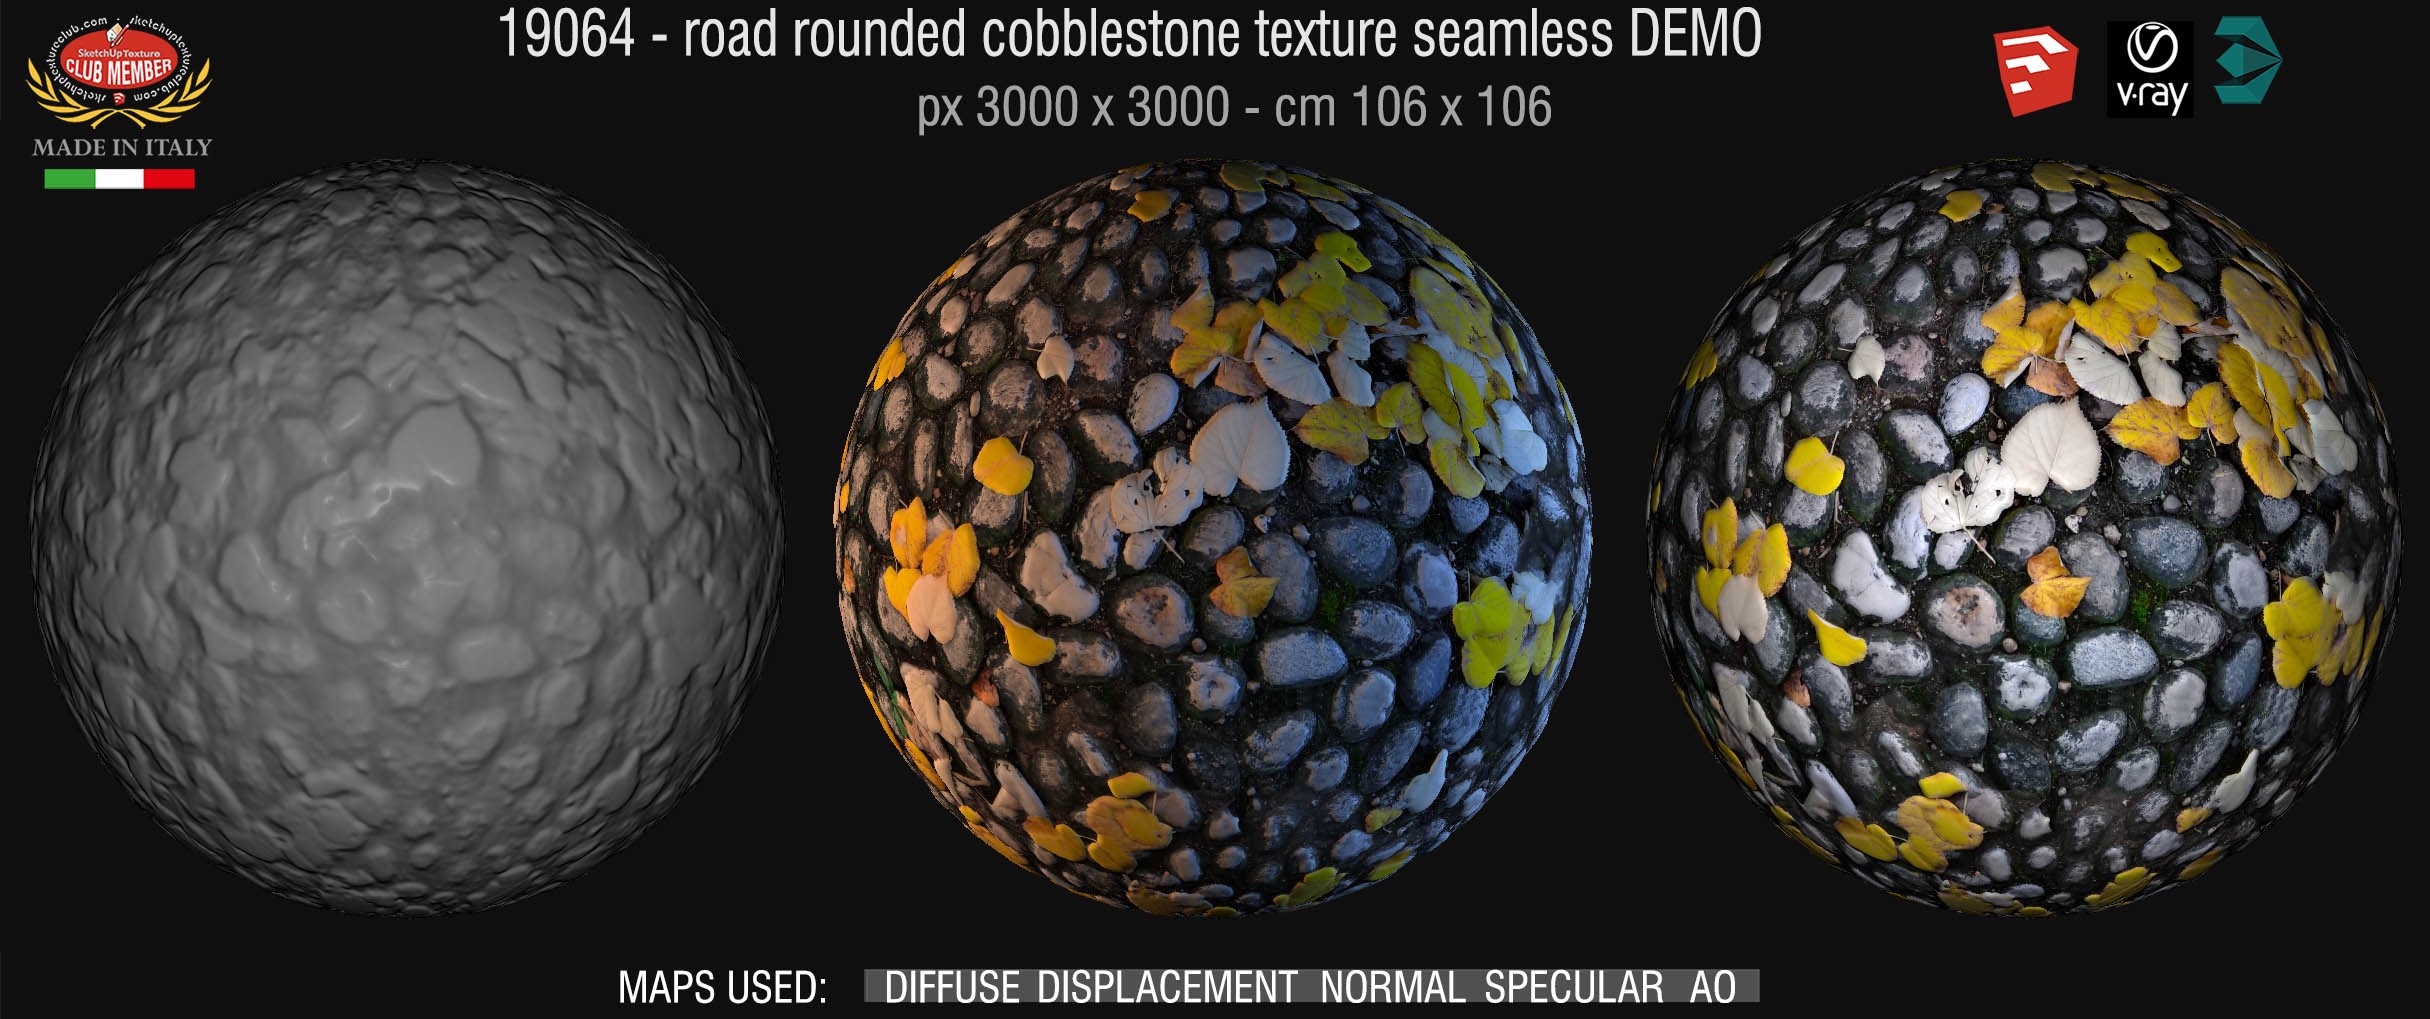 19064 Rounded cobblestone with dead leaves texture seamless + maps DEMO